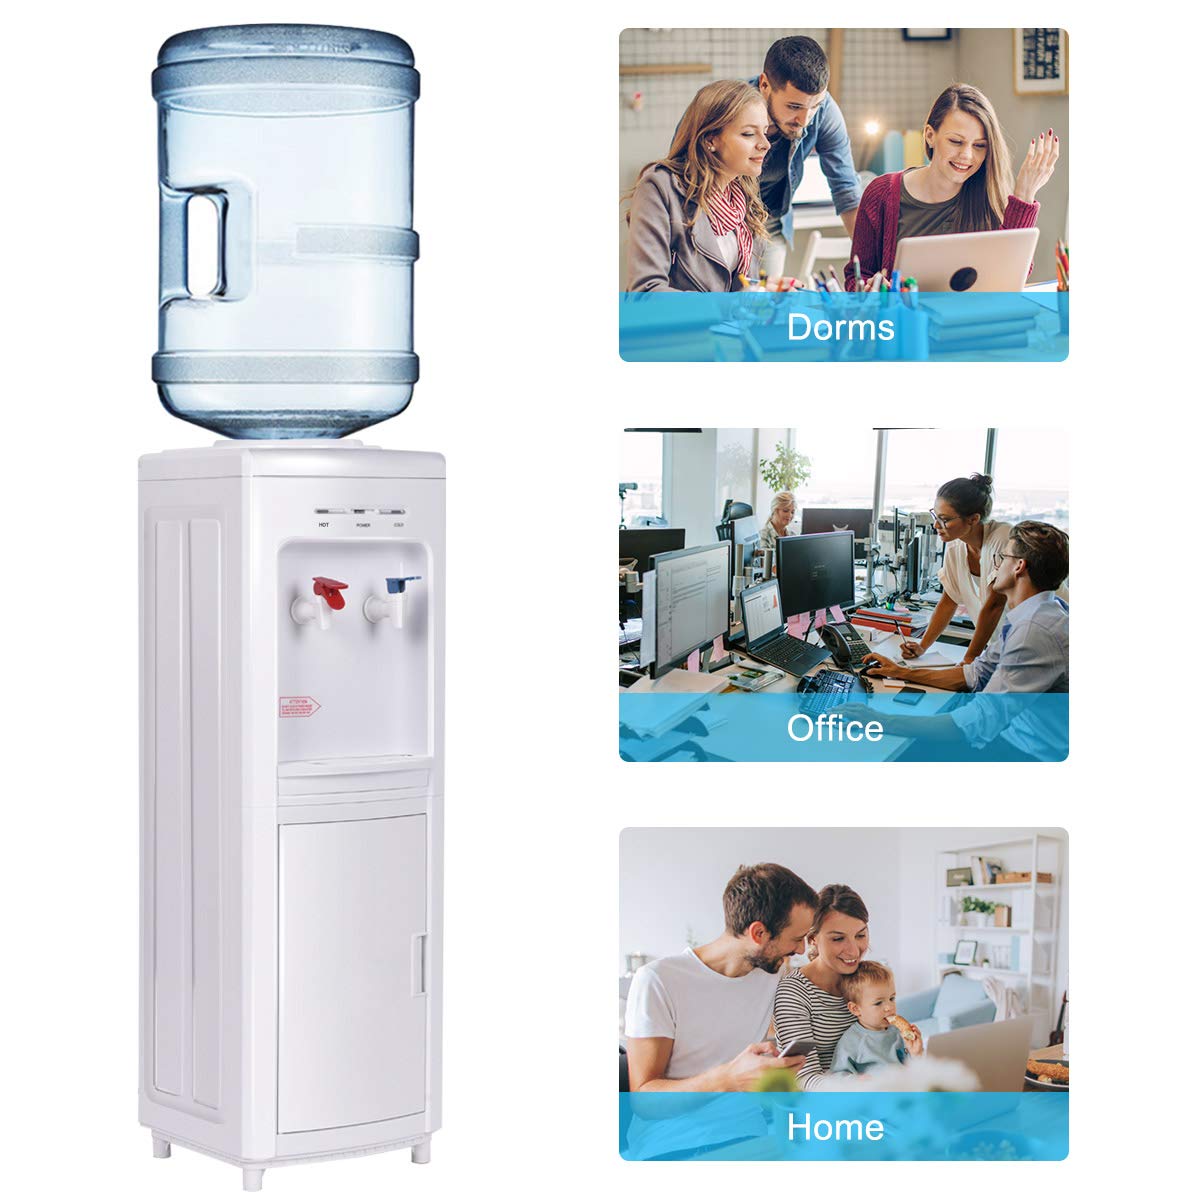 Water Dispenser, Water Dispenser with Adjustable Water Temperature, Cold Water and Hot Water Available Water Dispenser, Water Dispenser for Home and Office Use - White